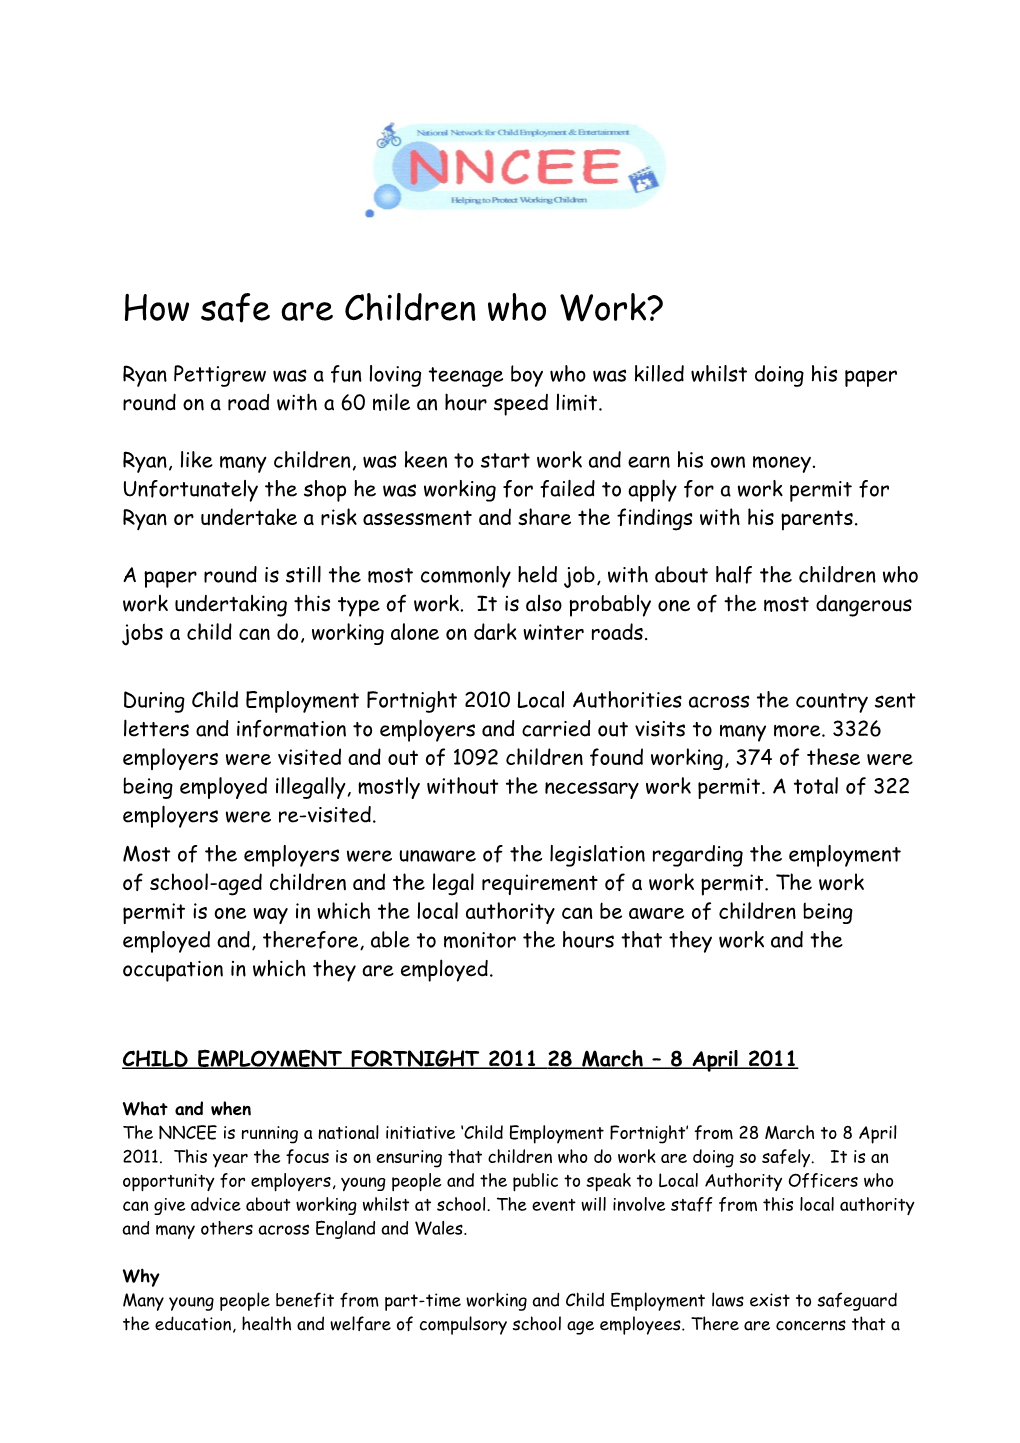 The DCSF (Department for Children, Schools and Families) Have, Finally, Issued Guidance